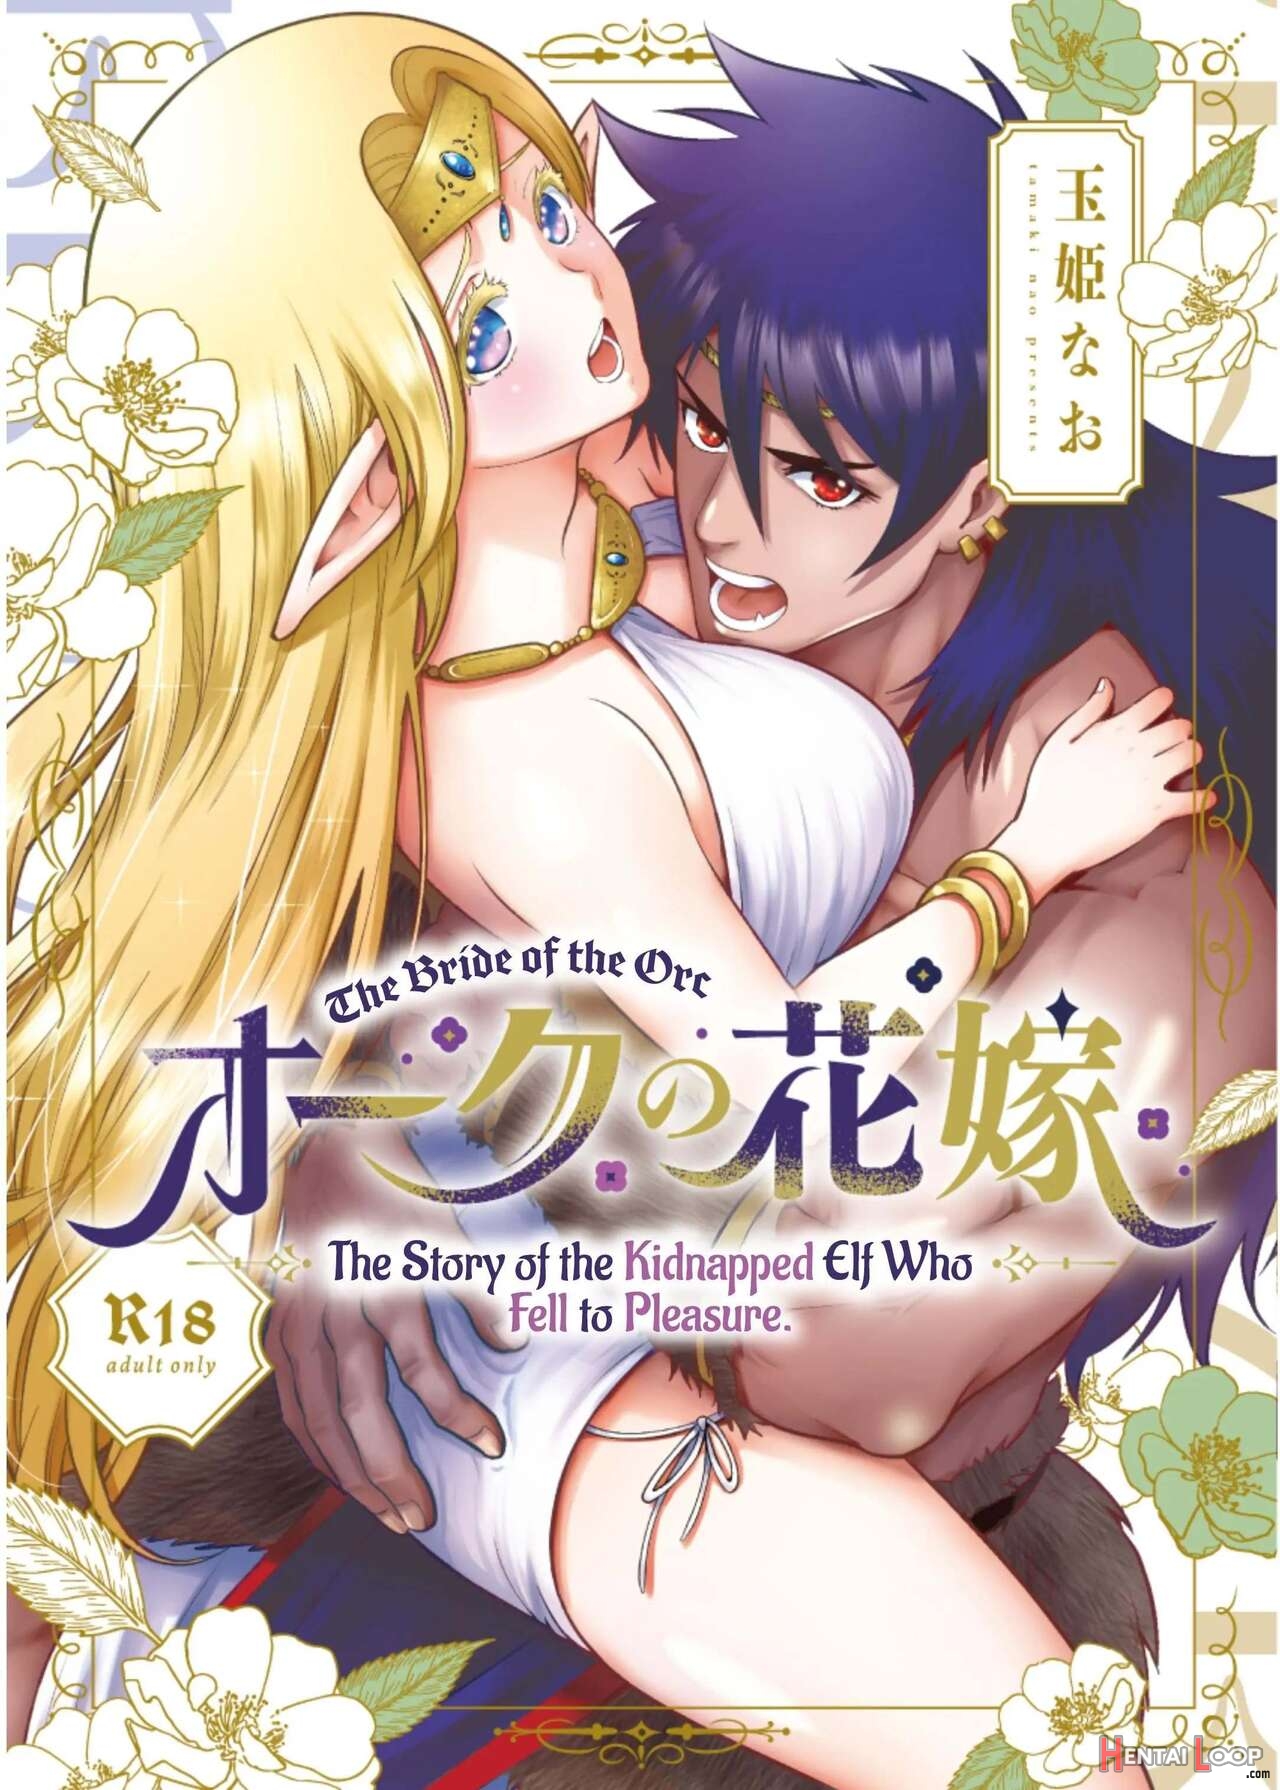 Orc Sex Story Porn - Orc Bride ~abducted Elf Corrupted By Pleasure~ (by Tamaki Nao) - Hentai  doujinshi for free at HentaiLoop